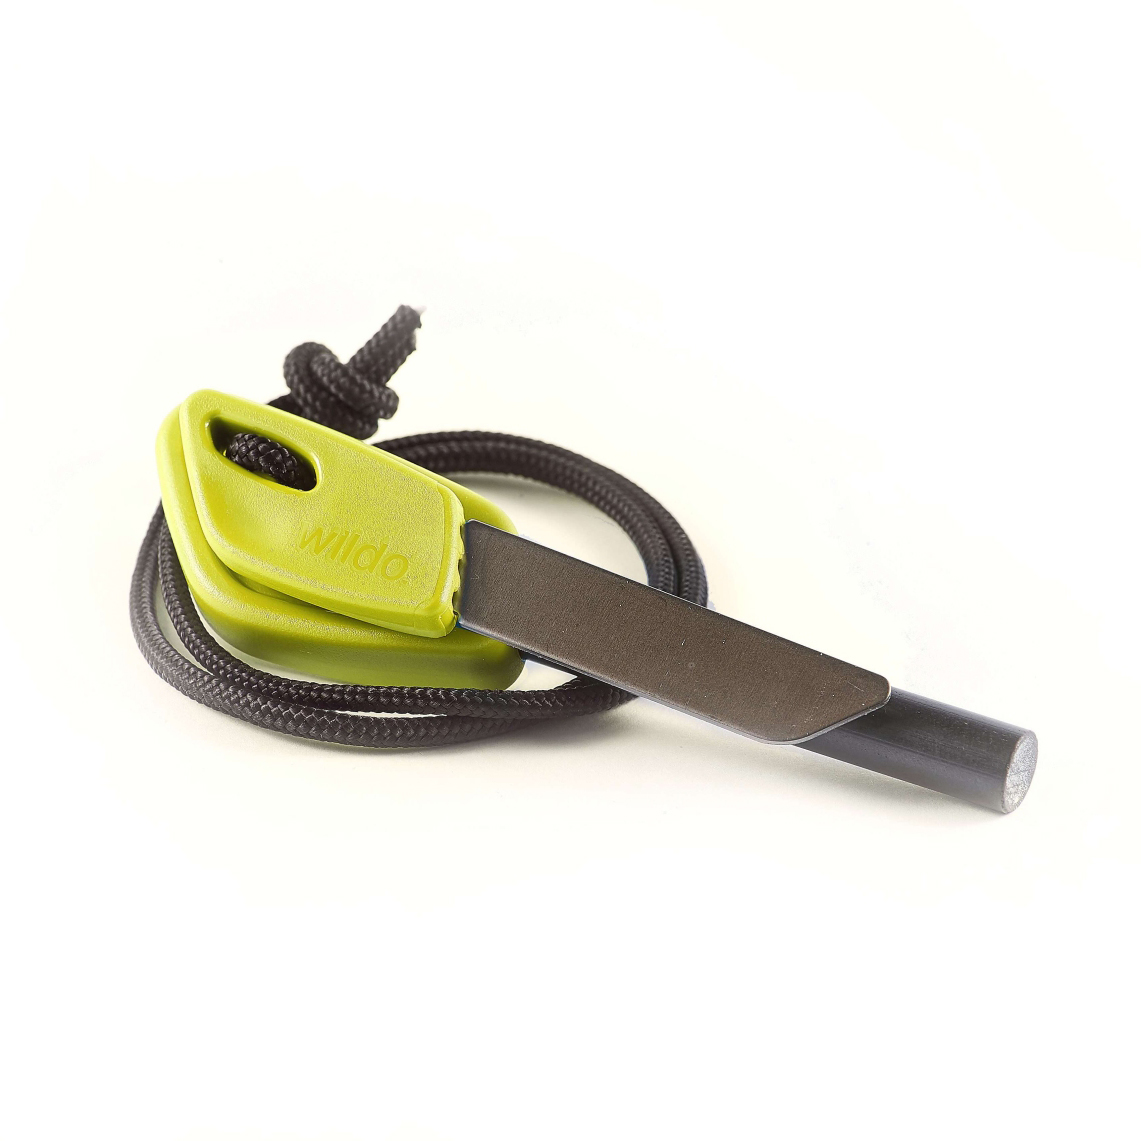 Image of Wildo Fire Flash Pro Large Fire Steel - lime